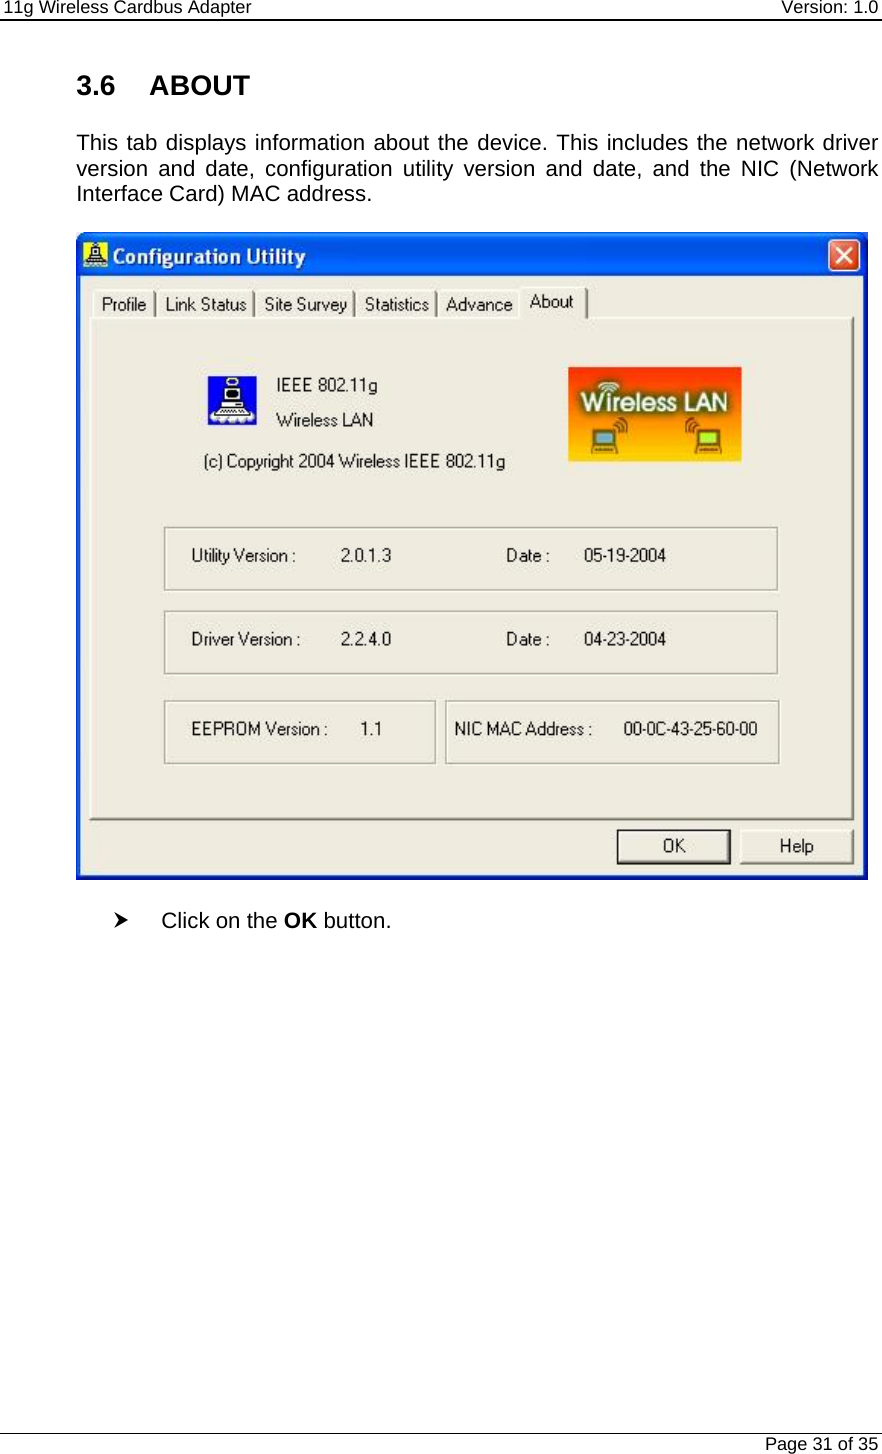 11g Wireless Cardbus Adapter    Version: 1.0   Page 31 of 35 3.6 ABOUT  This tab displays information about the device. This includes the network driver version and date, configuration utility version and date, and the NIC (Network Interface Card) MAC address.     h Click on the OK button.  